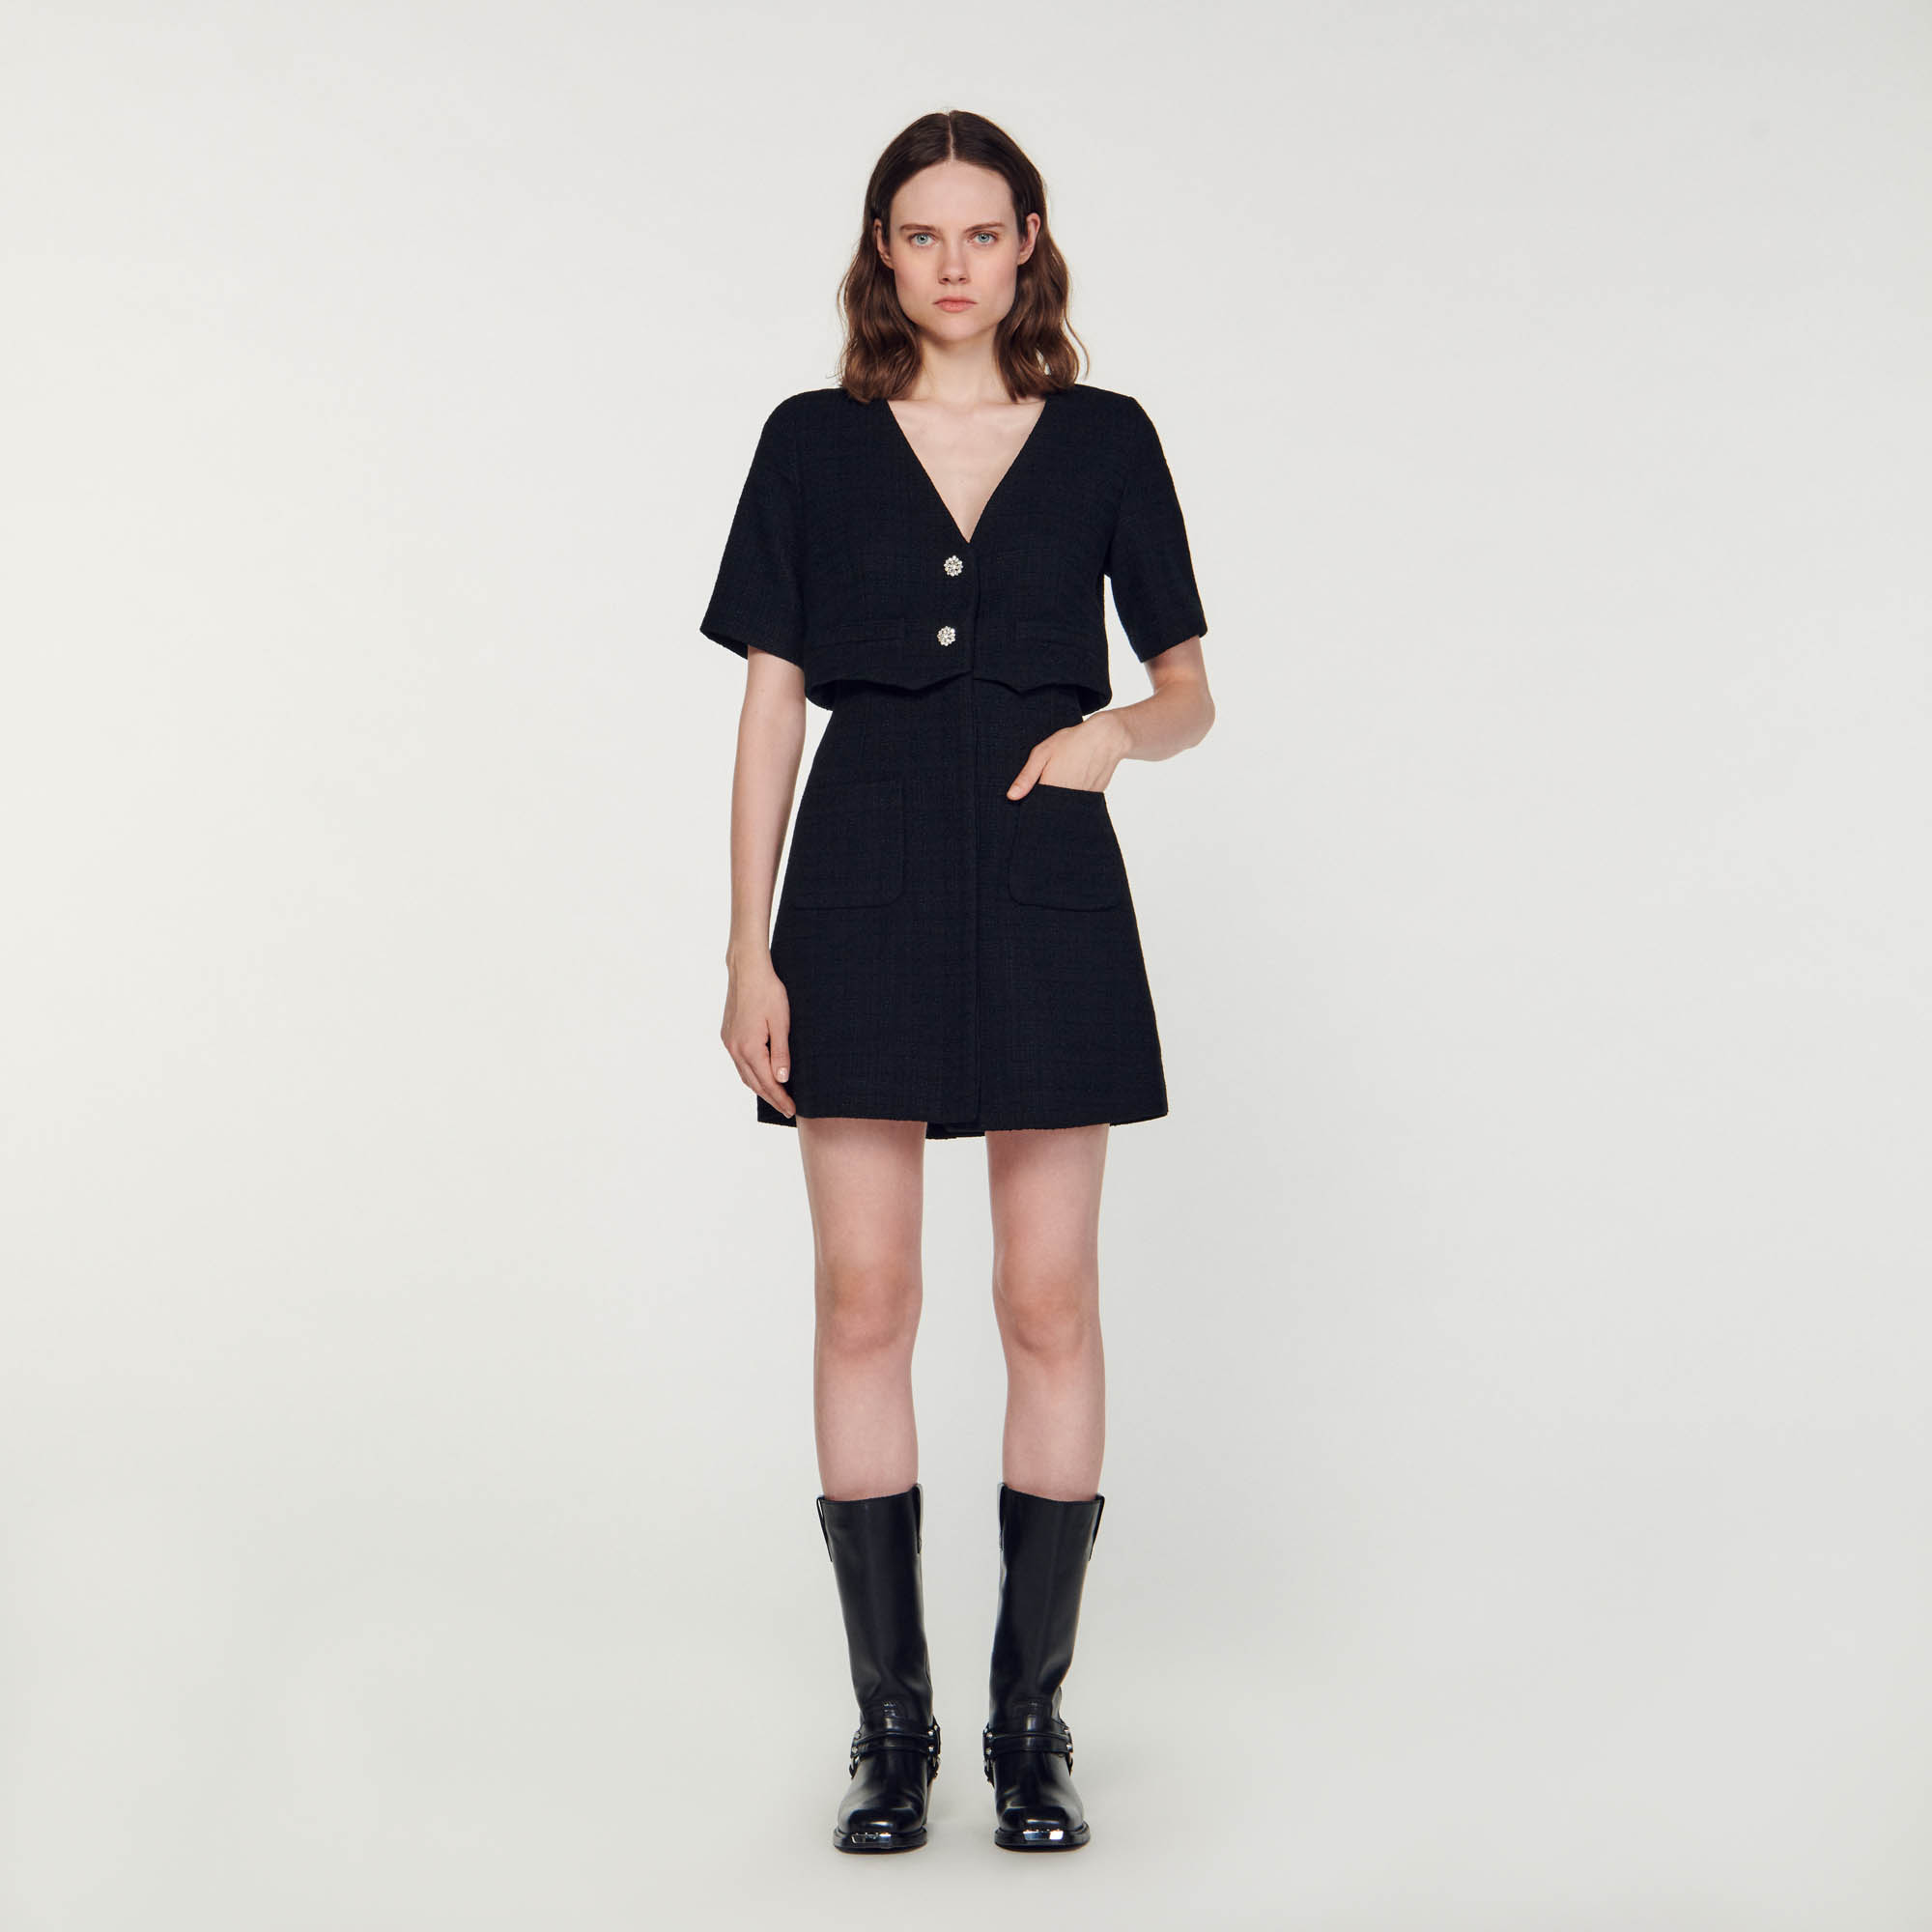 Sandro cotton Short tweed 2-in-1 dress featuring a layered top with a crossover V-shaped neckline and jeweled buttons, short sleeves, and a straight-cut skirt